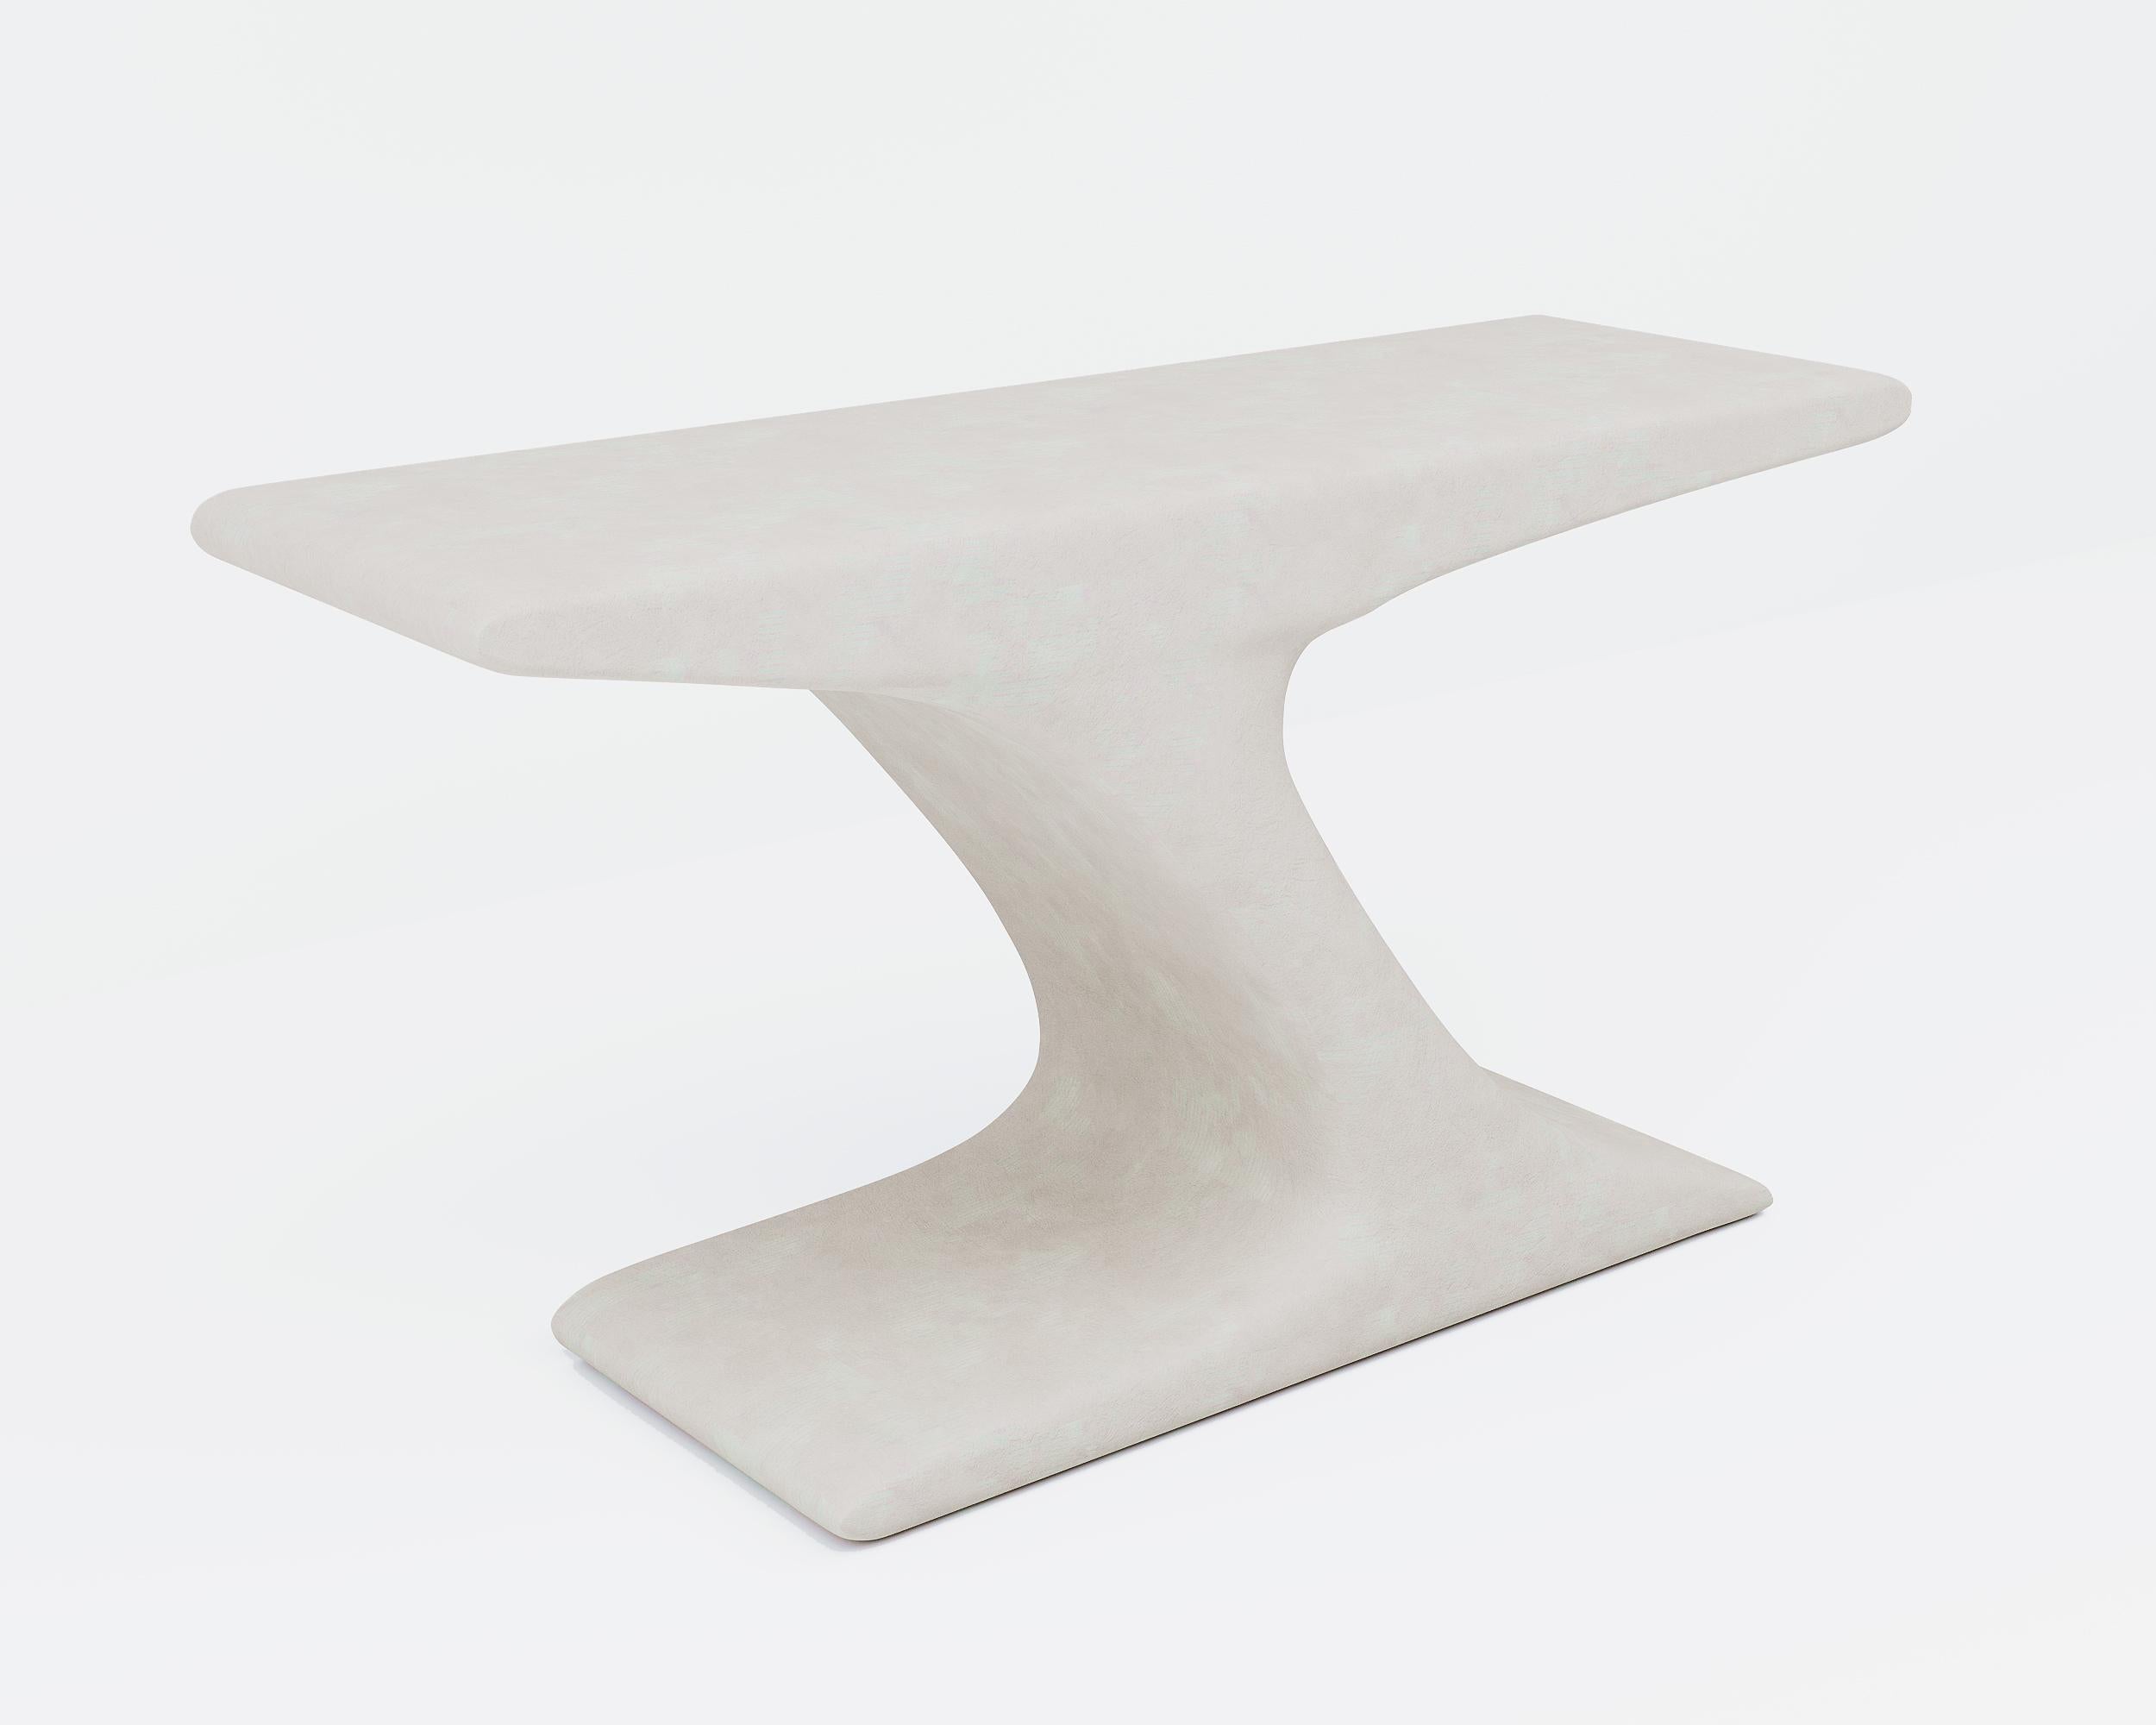 A sculpted console in concrete. Smooth lines and a high polished surface evoke a sense of tranquil strength and serenity.
Meticulously hand crafted in Portland, Oregon, the console has a powerful personality that anchors a room with a strong yet